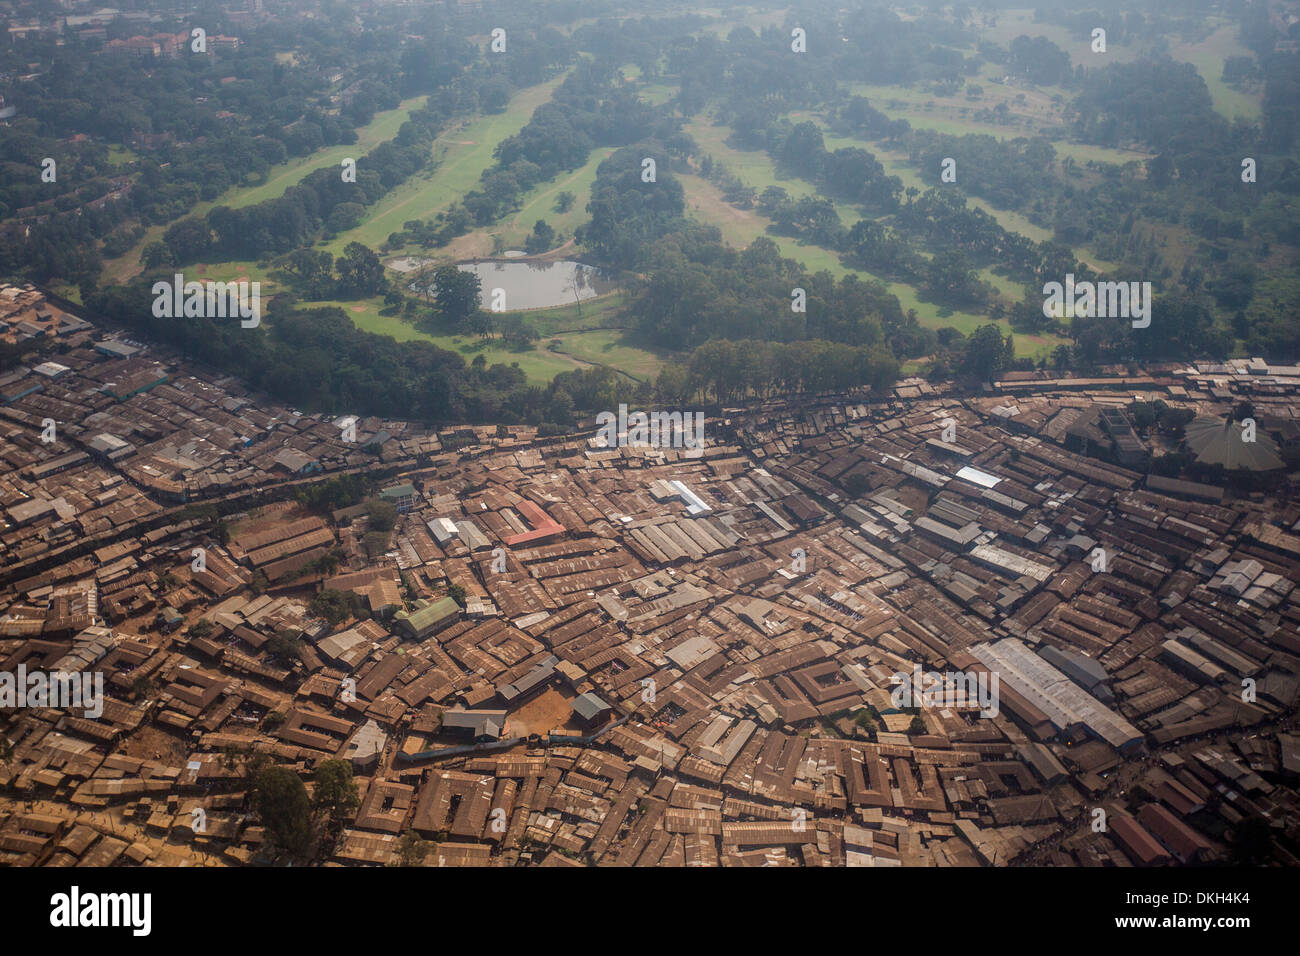 Aerial view of a slum on the outskirts of Nairobi, Kenya, East Africa, Africa Stock Photo